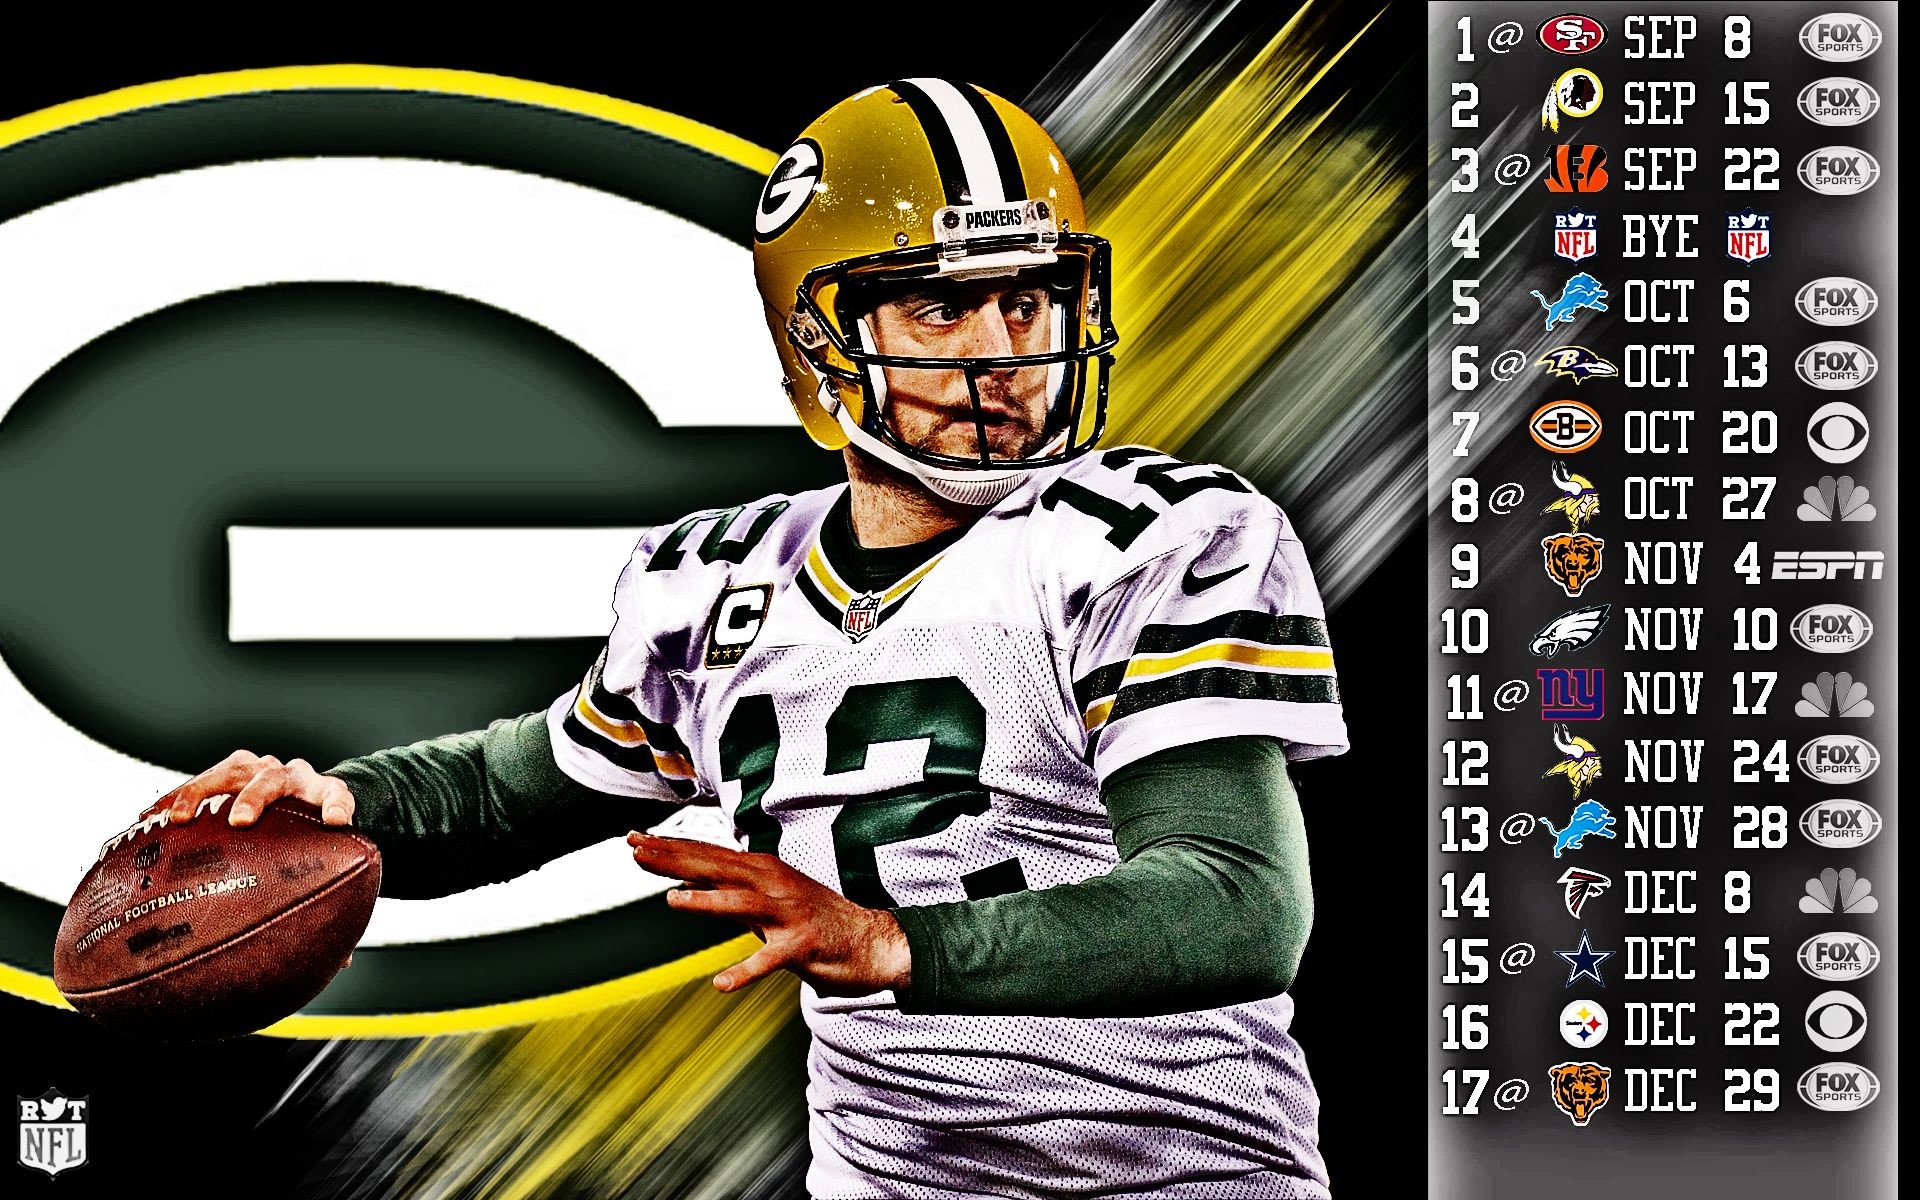 1920x1200 Green Bay Packers 2011 Wallpaper WS 1920 x 1200. Pages ...